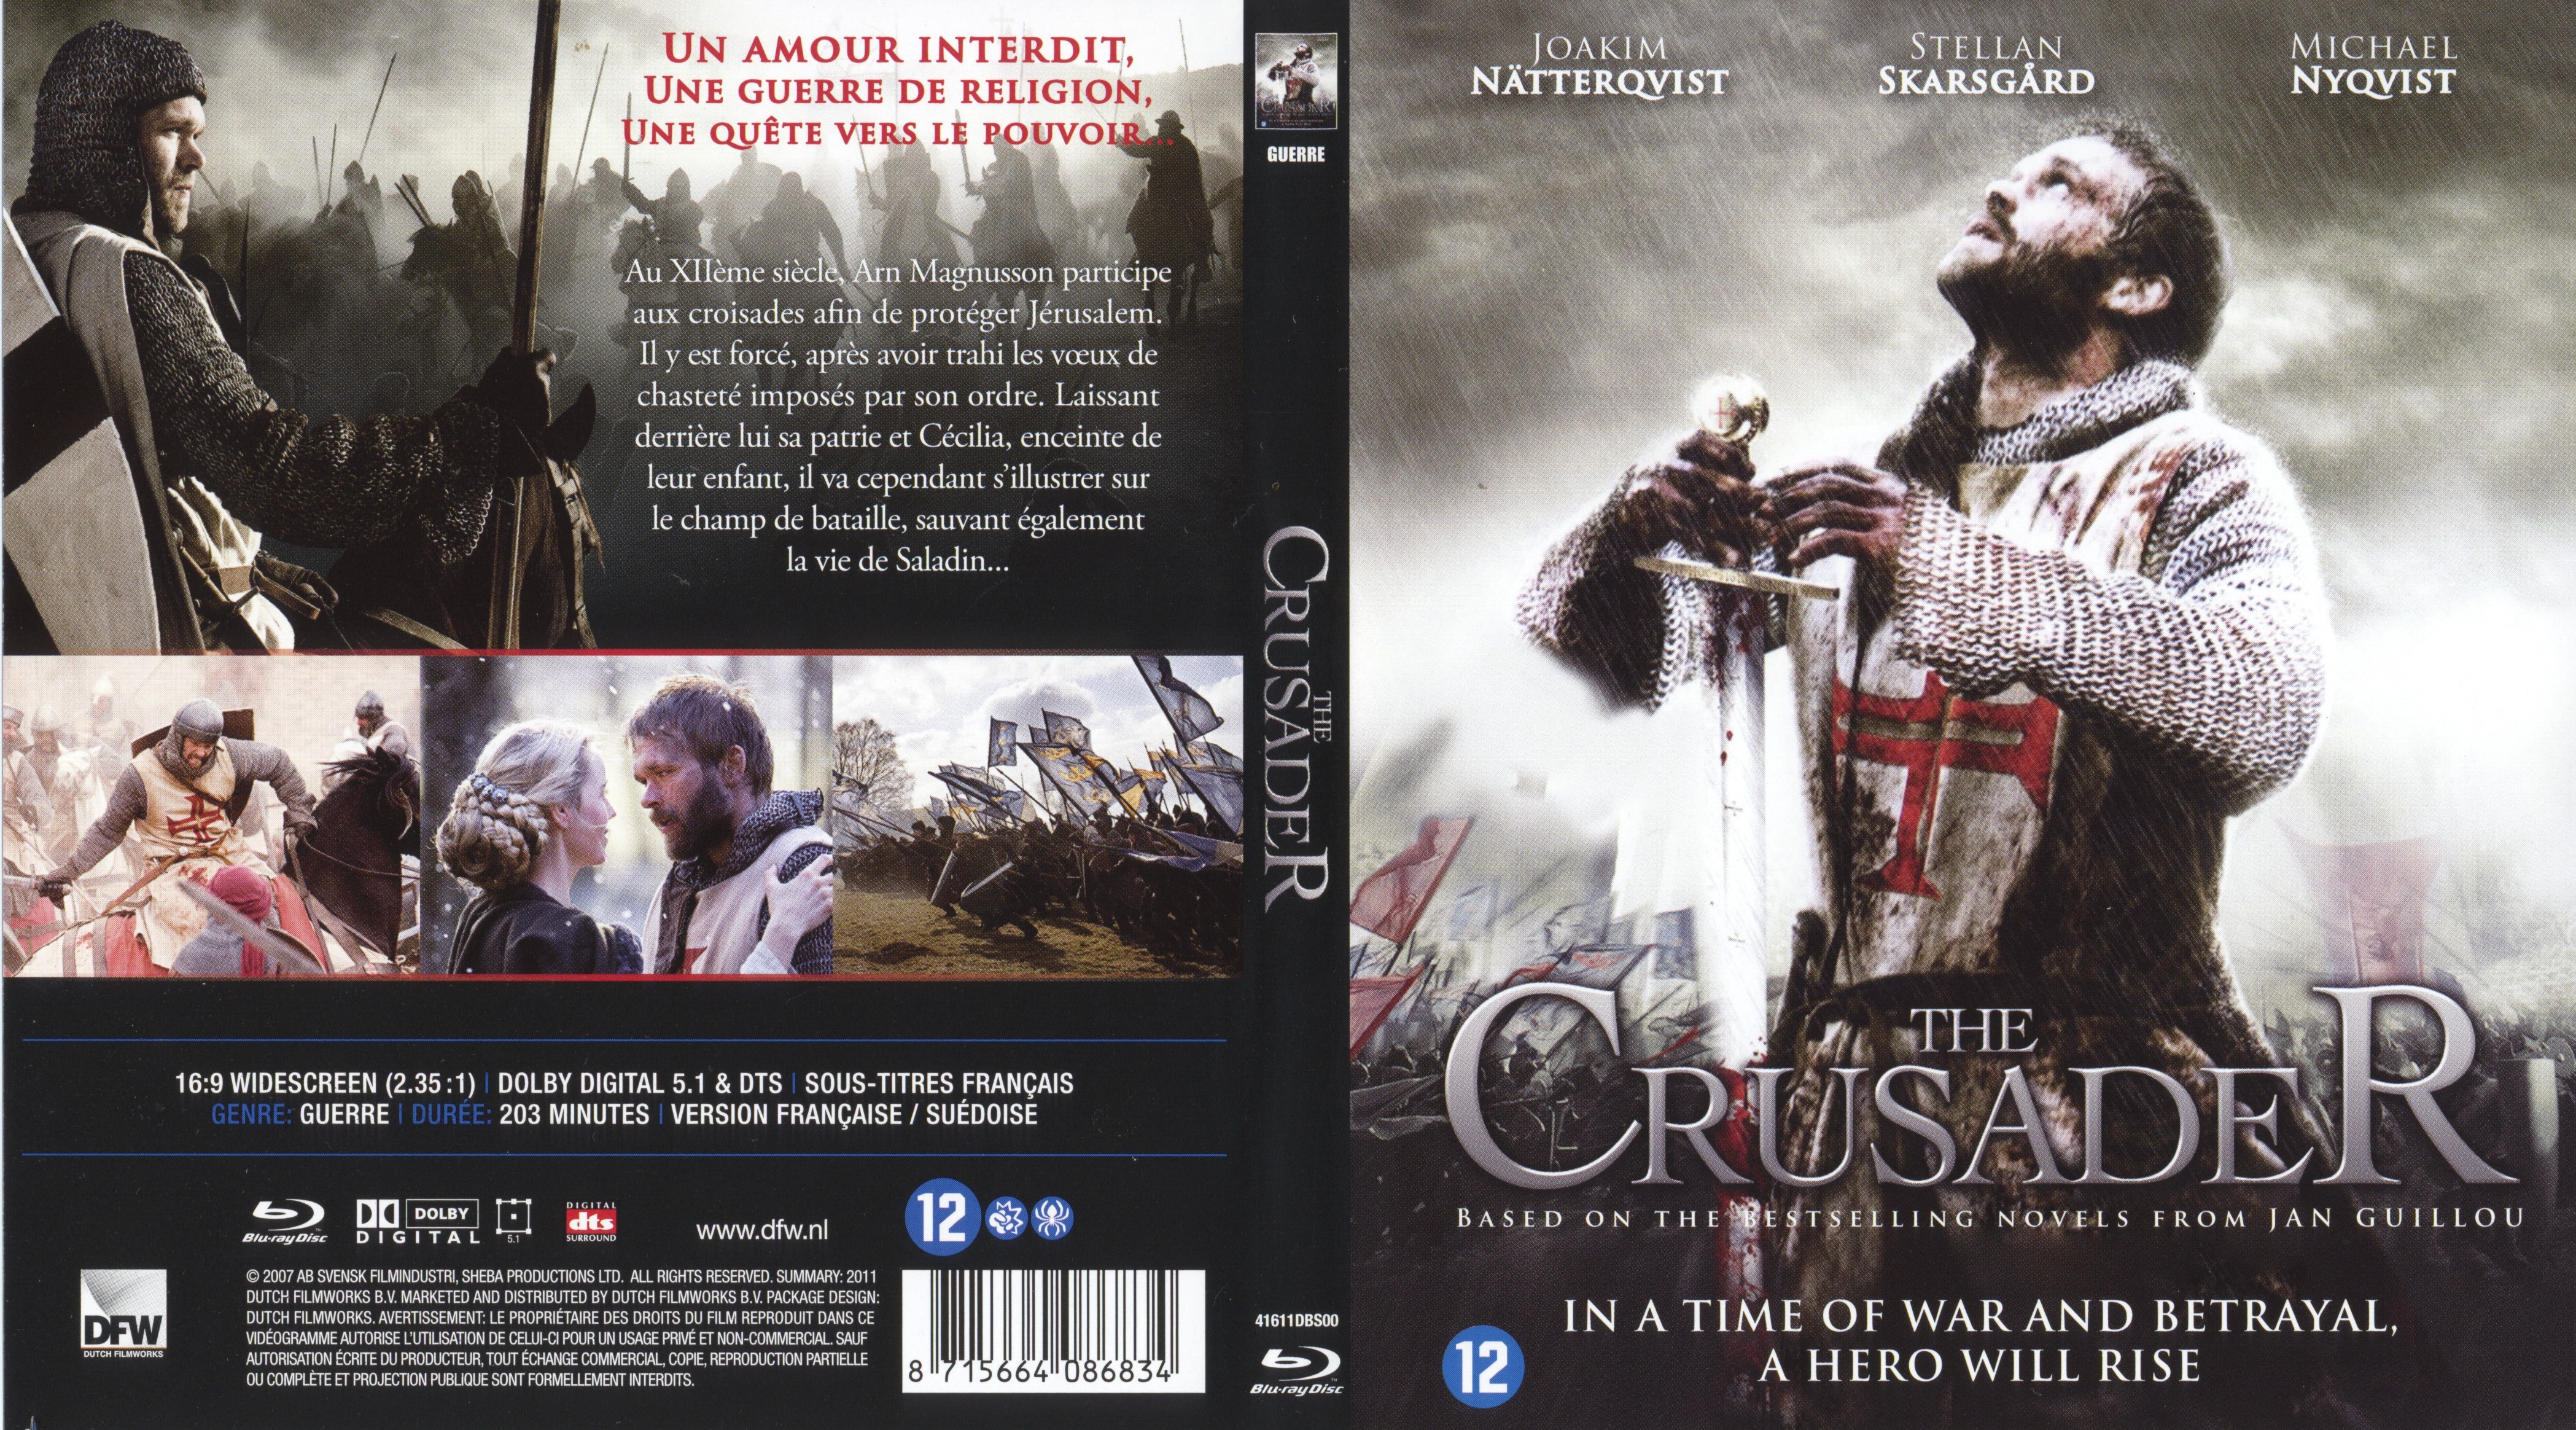 Jaquette DVD The Crusader (BLU-RAY)